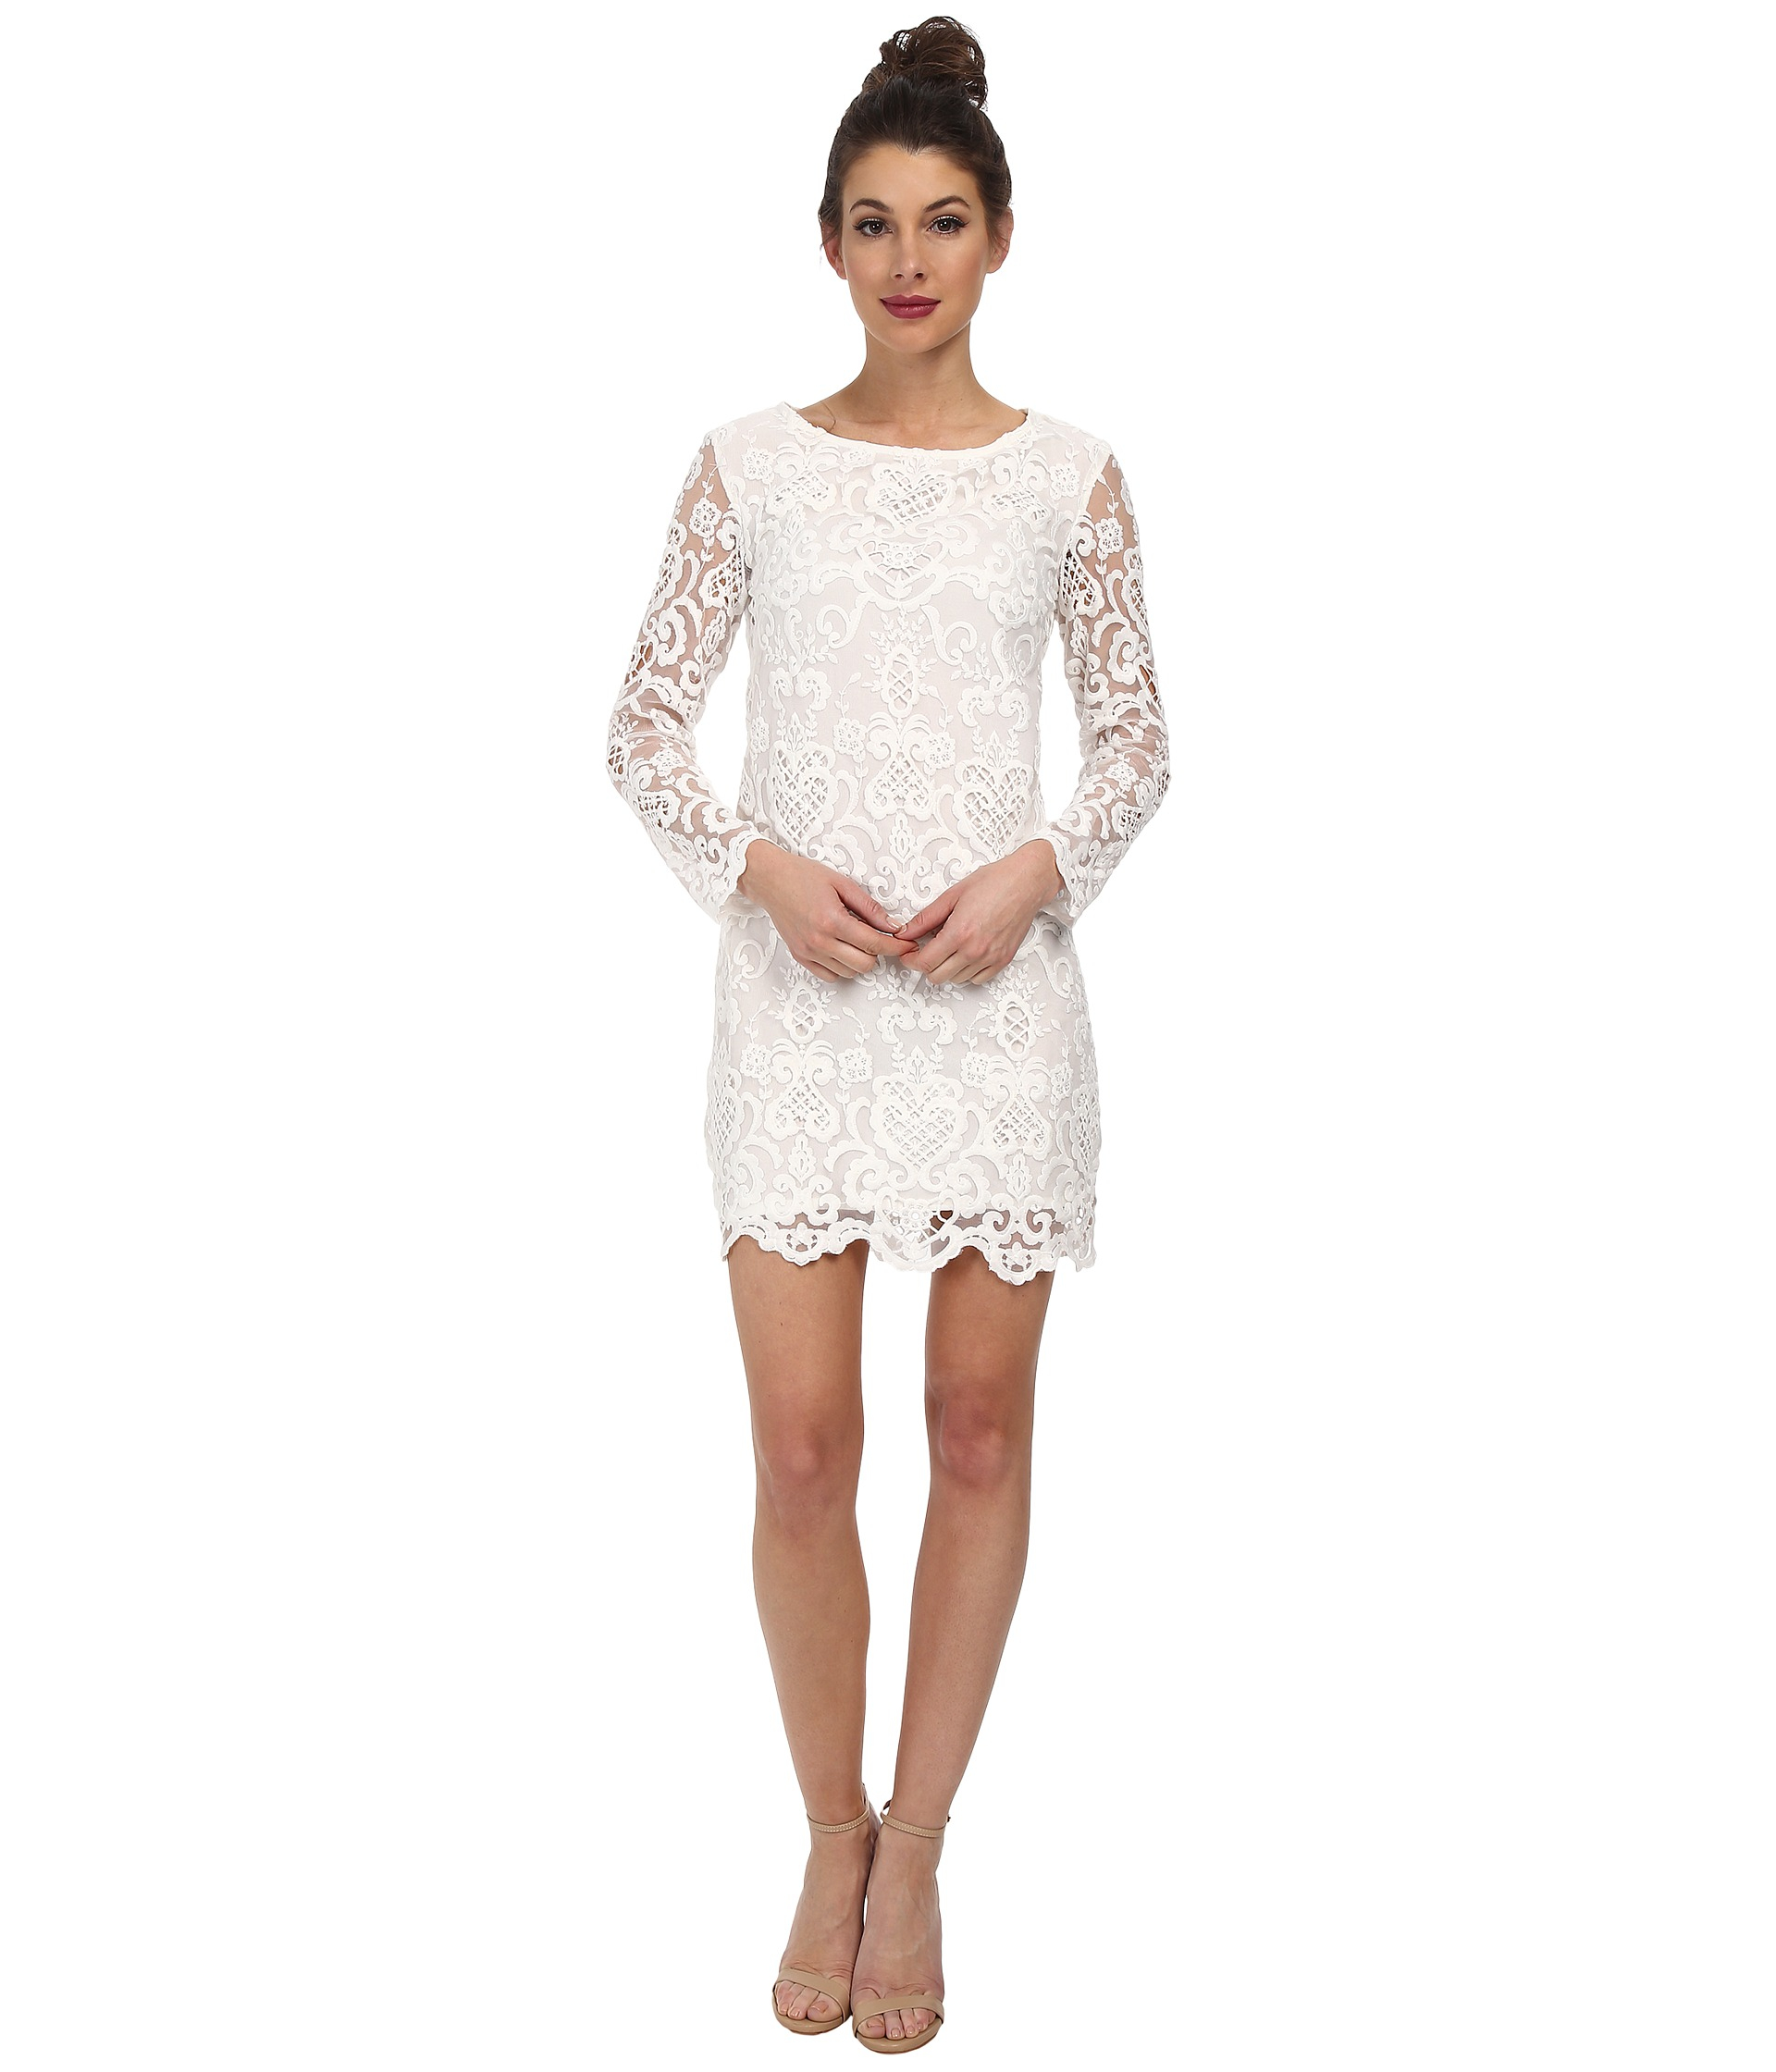 French connection Nebraska Lace Dress 71Dgo in White | Lyst